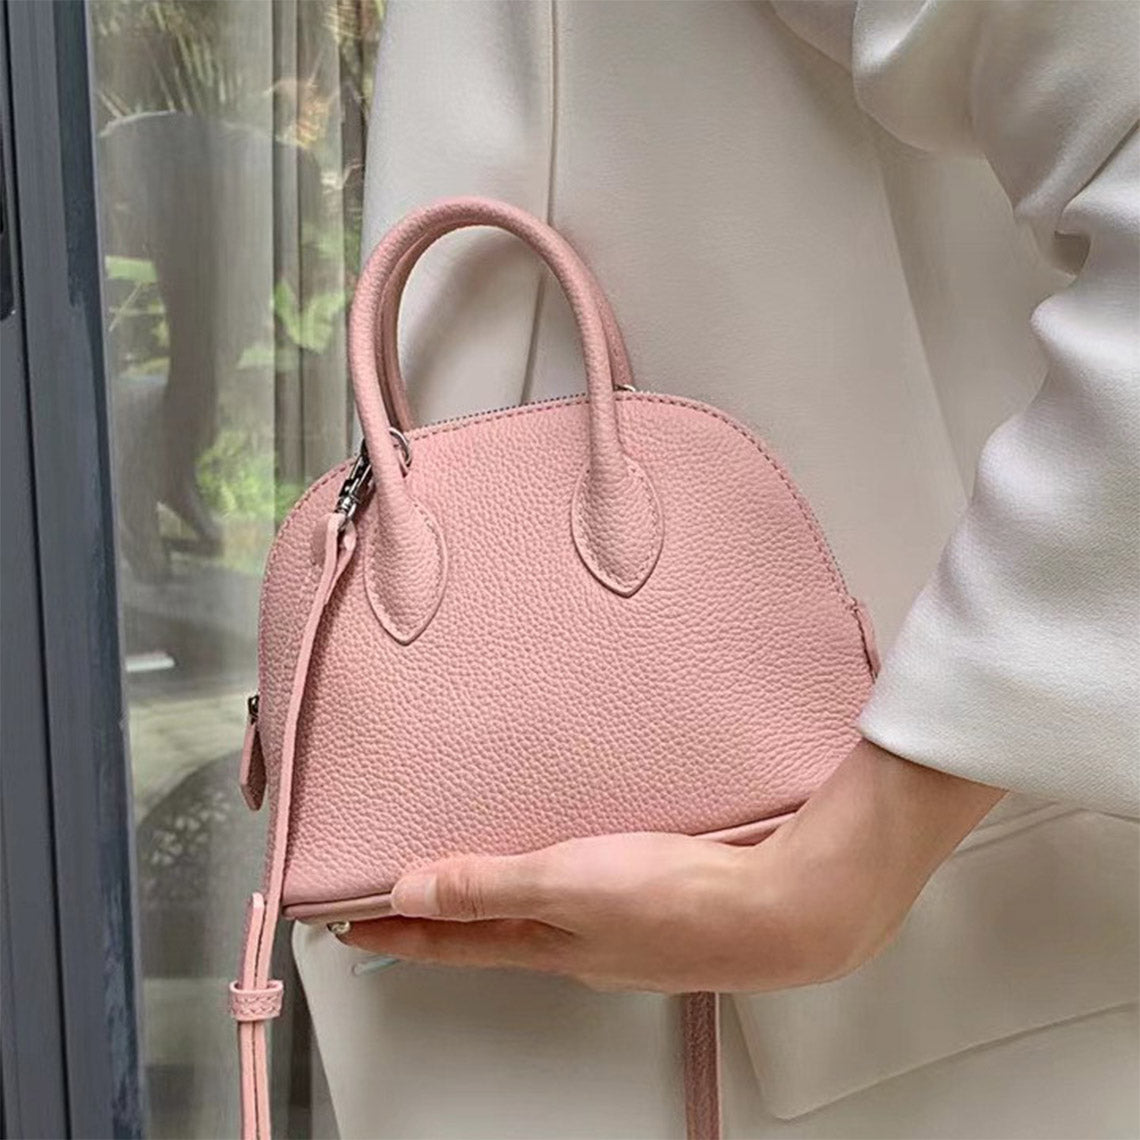 Mini Leather Handbag for Women | Pink Small Top Handle Bag - POPSEWING®